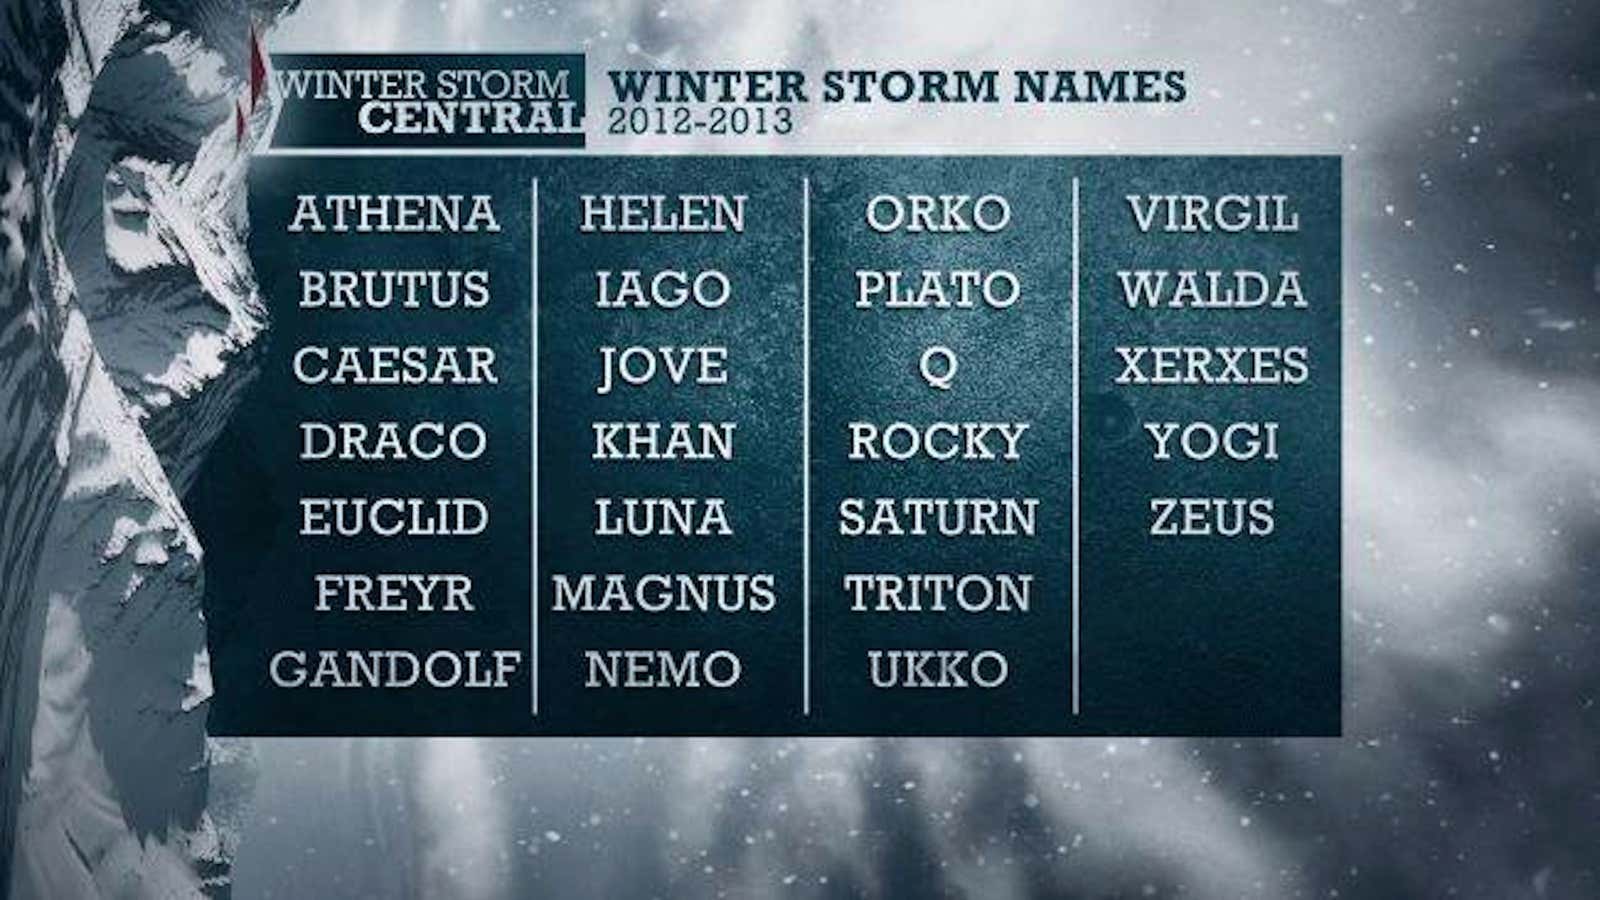 The Weather Channel’s predetermined list of names for winter storms, 2012-2013.